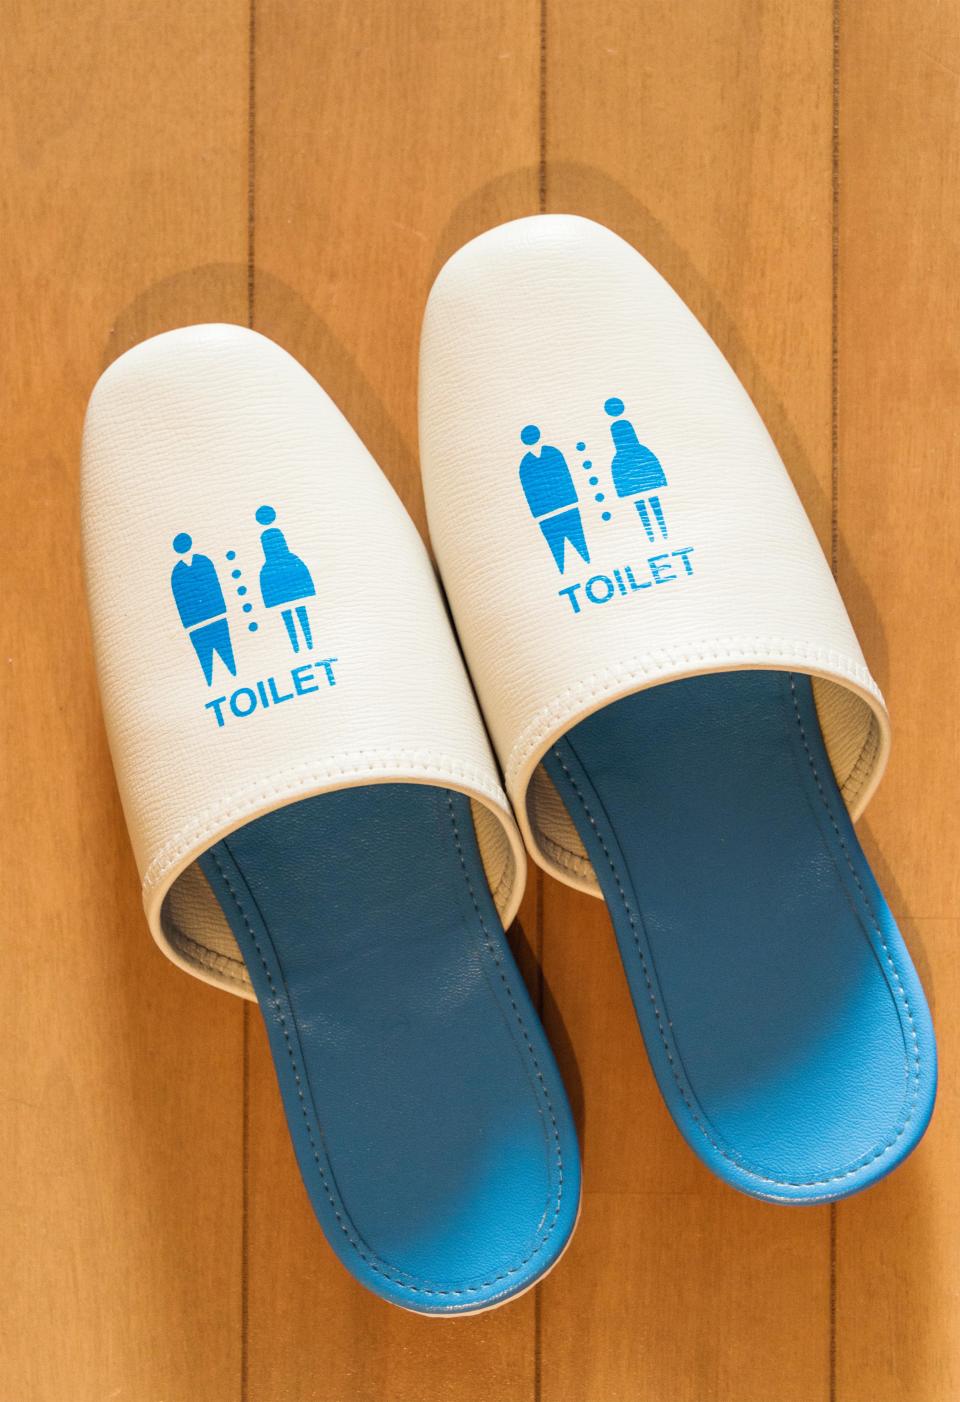 <p>For those of you freaking out about taking off your shoes in public, it's likely you'll be given some slippers to keep your tootsies warm and so you can venture to the toilet. Just remember to give them back before you leave!</p>